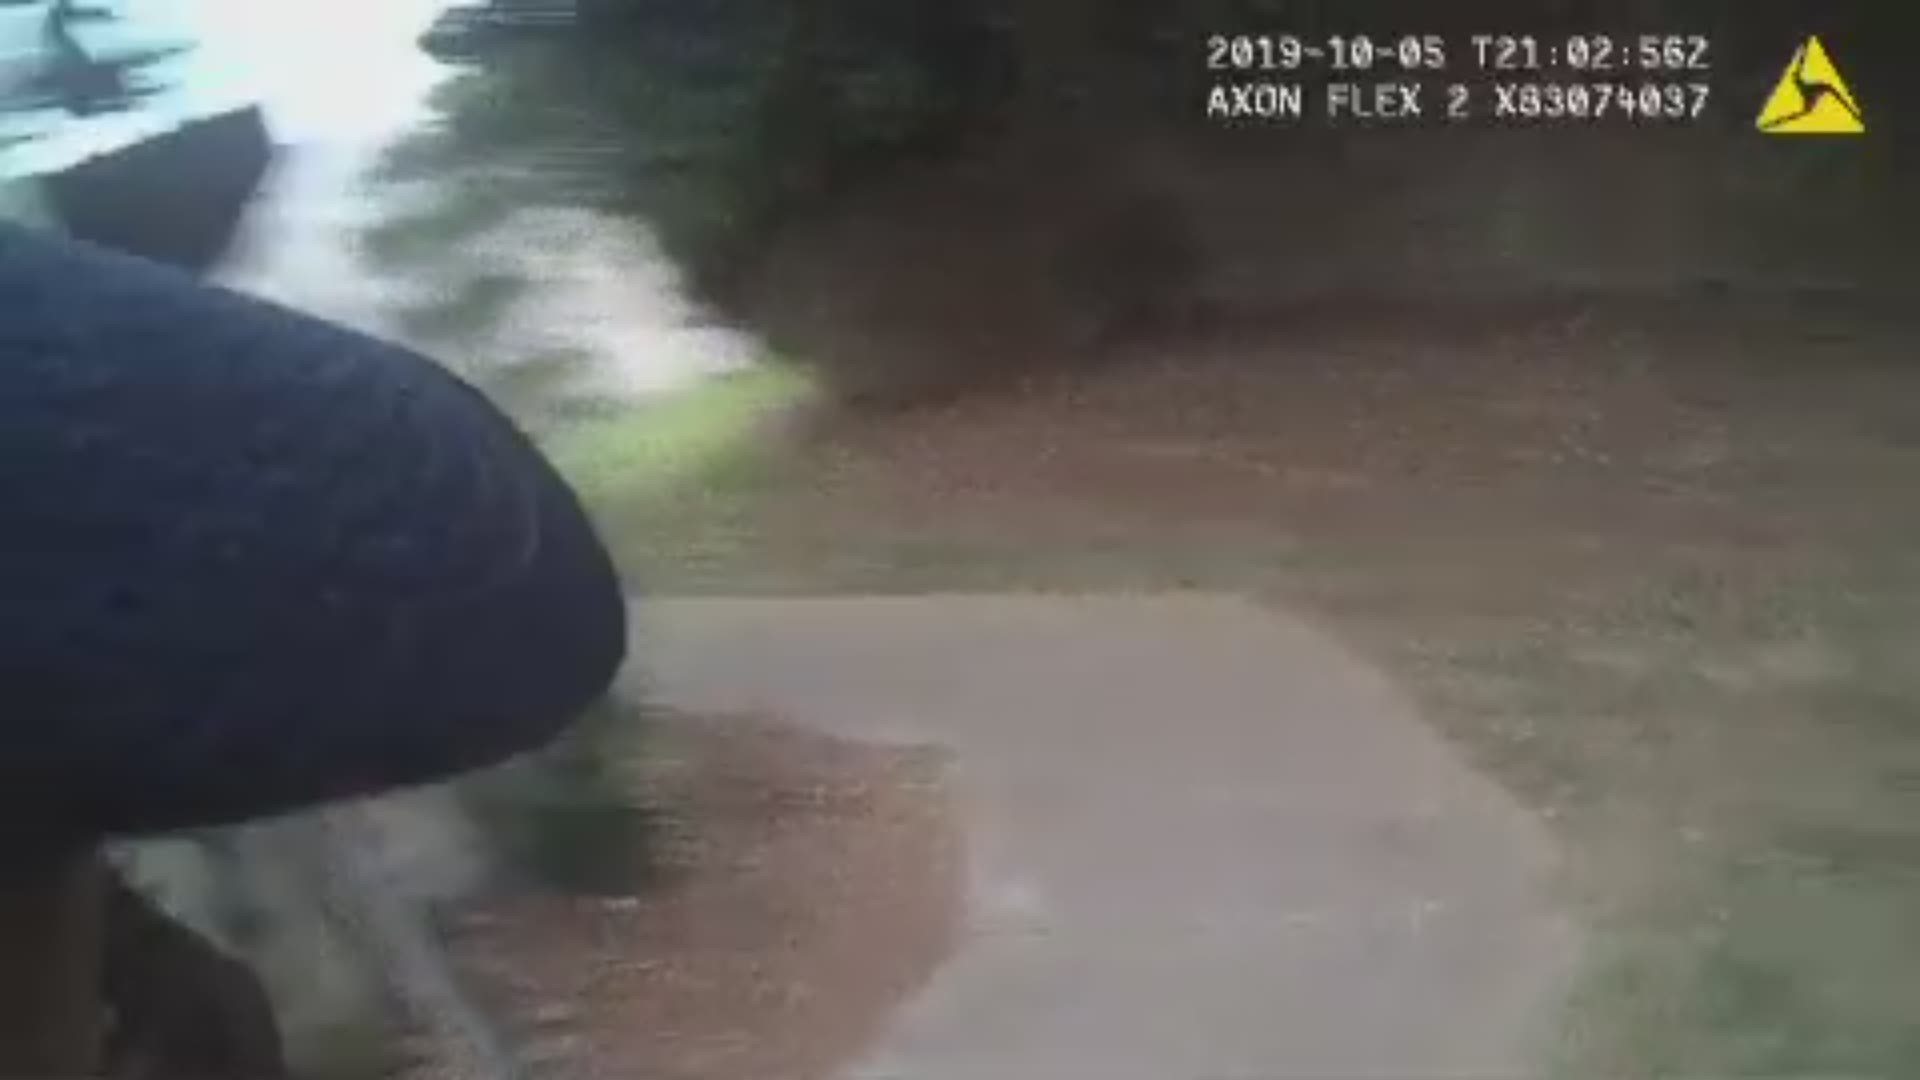 The bodycam video shows when a man swung a knife at an Athens officer telling him to stop walking away.